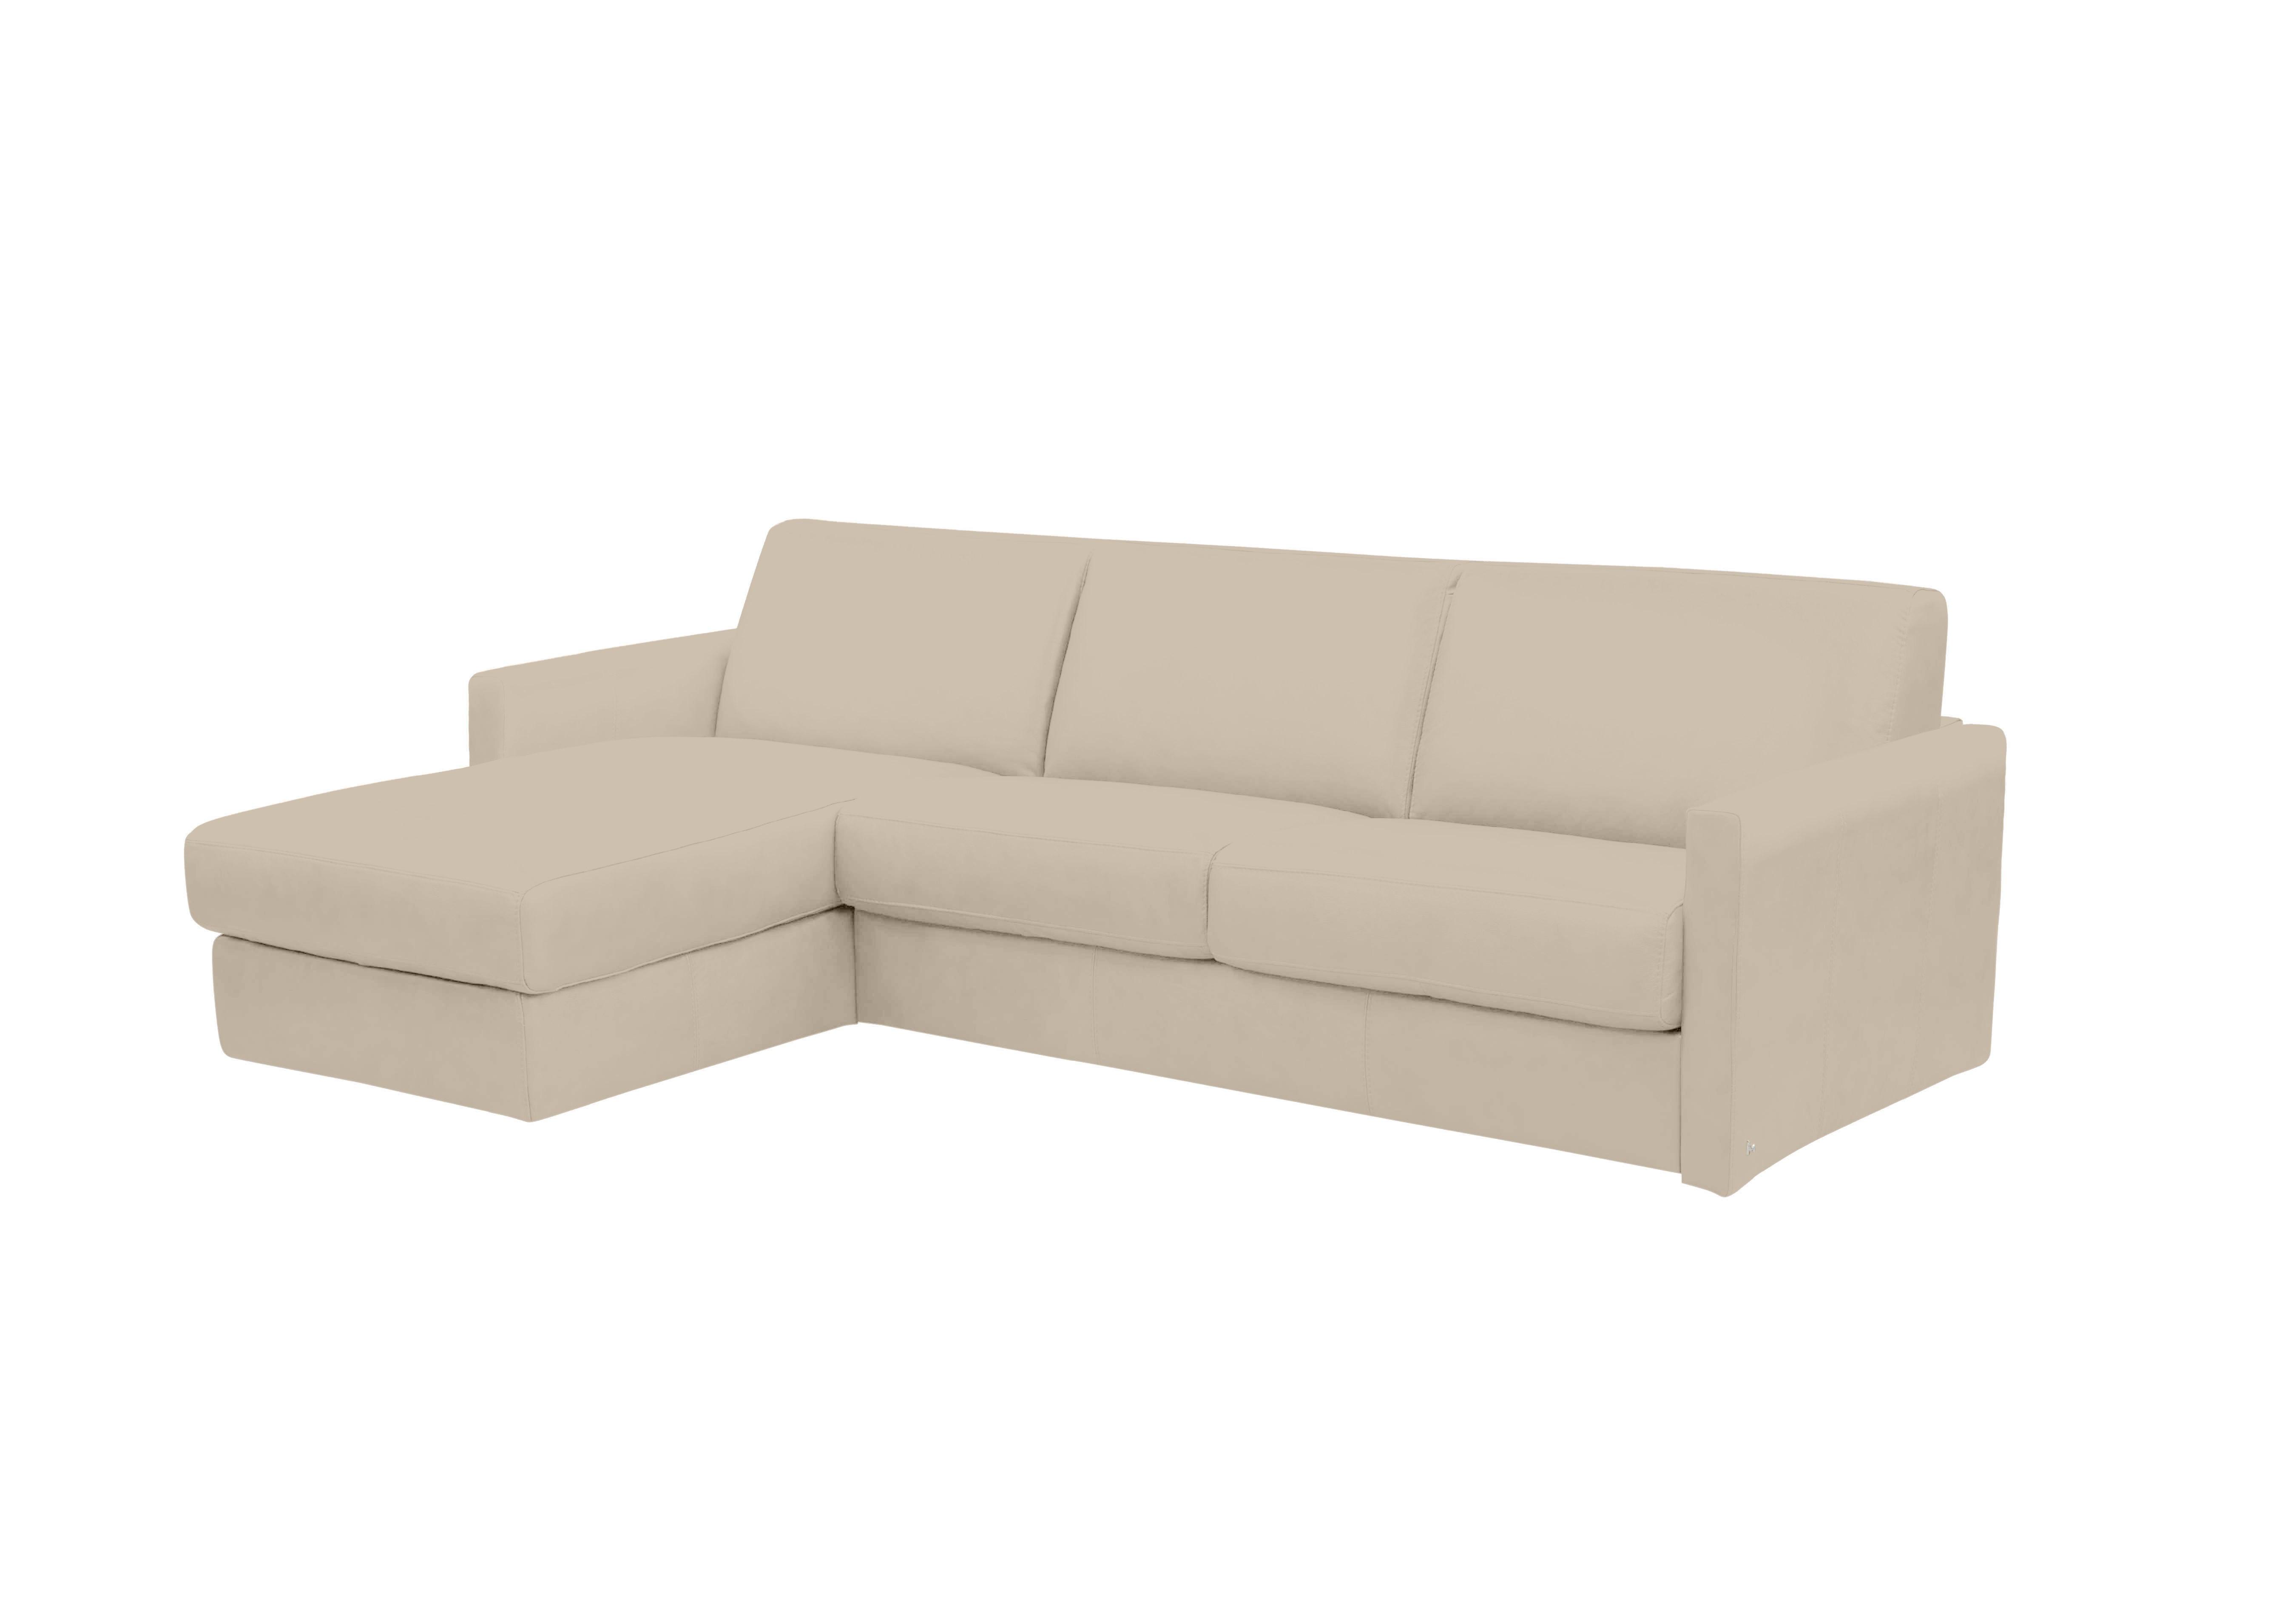 Alcova 3 Seater Leather Sofa Bed with Storage Chaise and Slim Arms in Botero Crema 2156 on Furniture Village